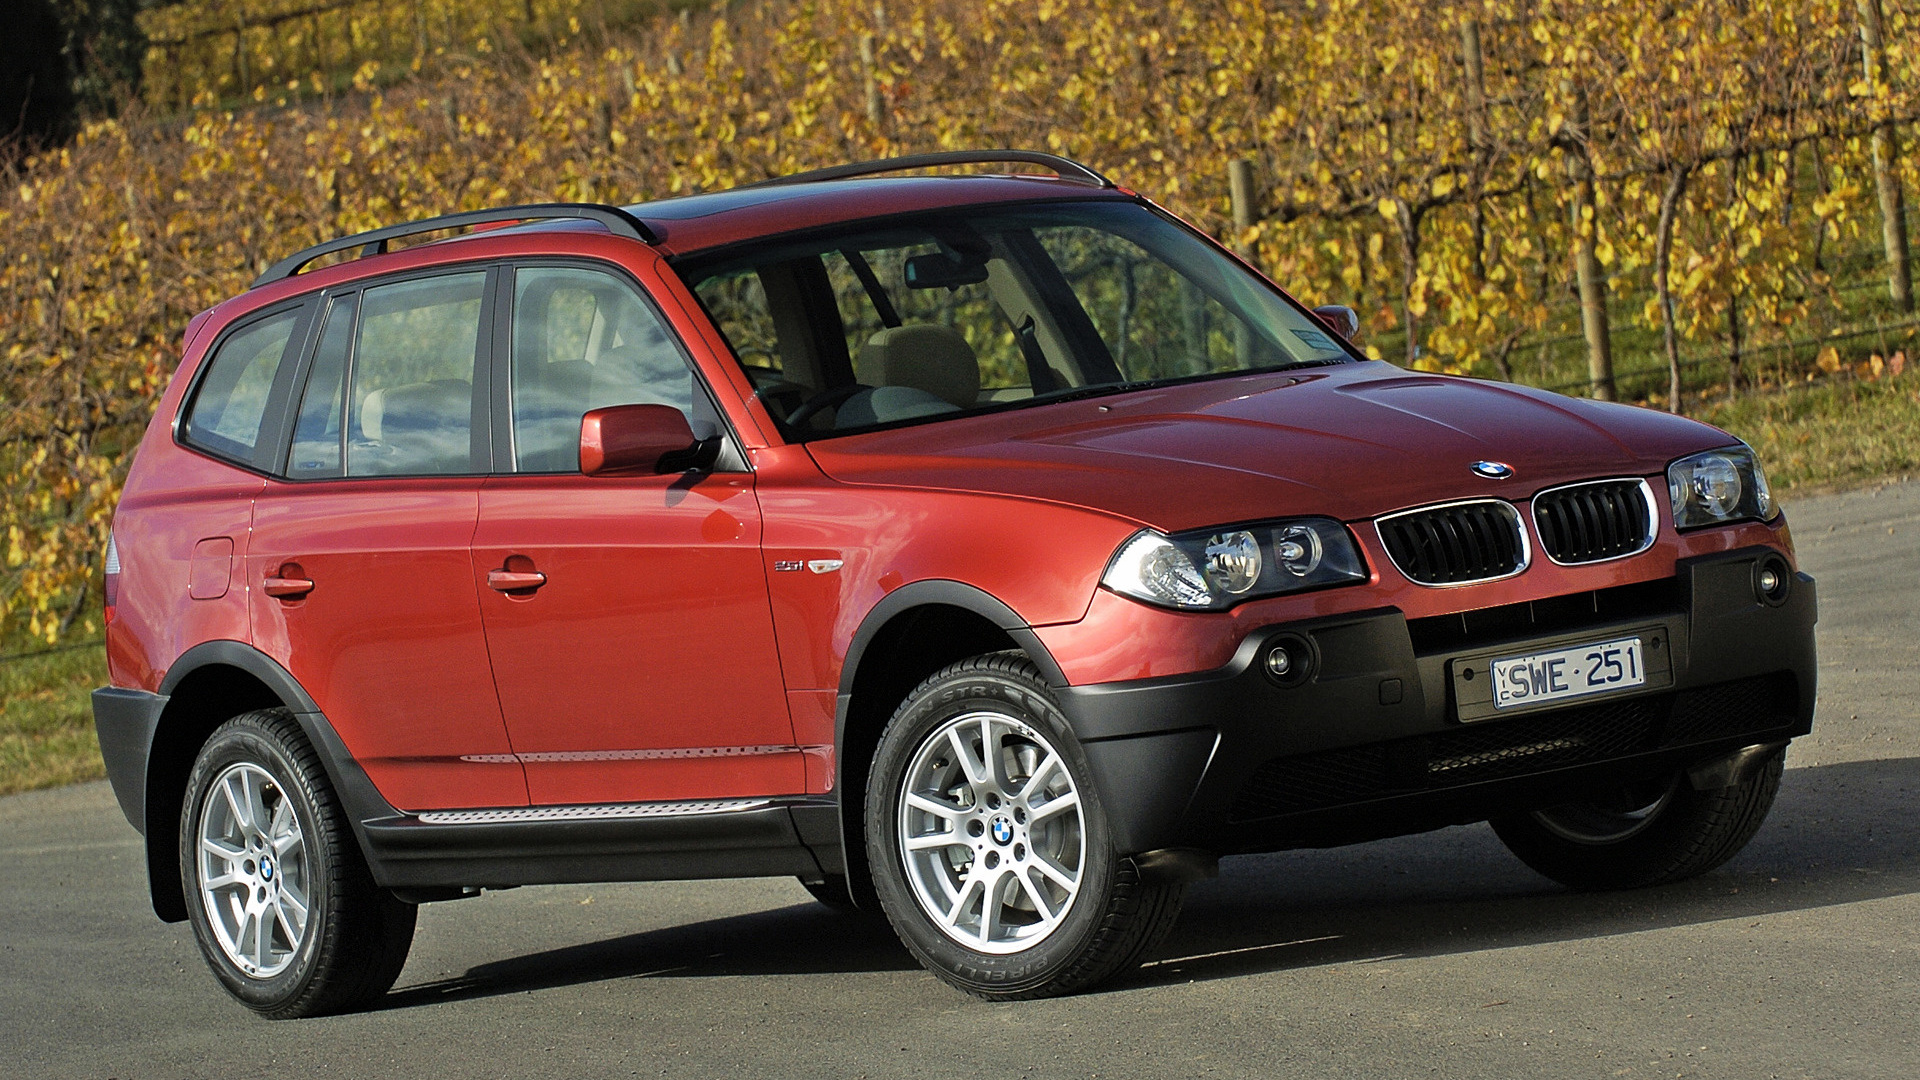 2003 BMW X3 (AU) - Wallpapers and HD Images | Car Pixel